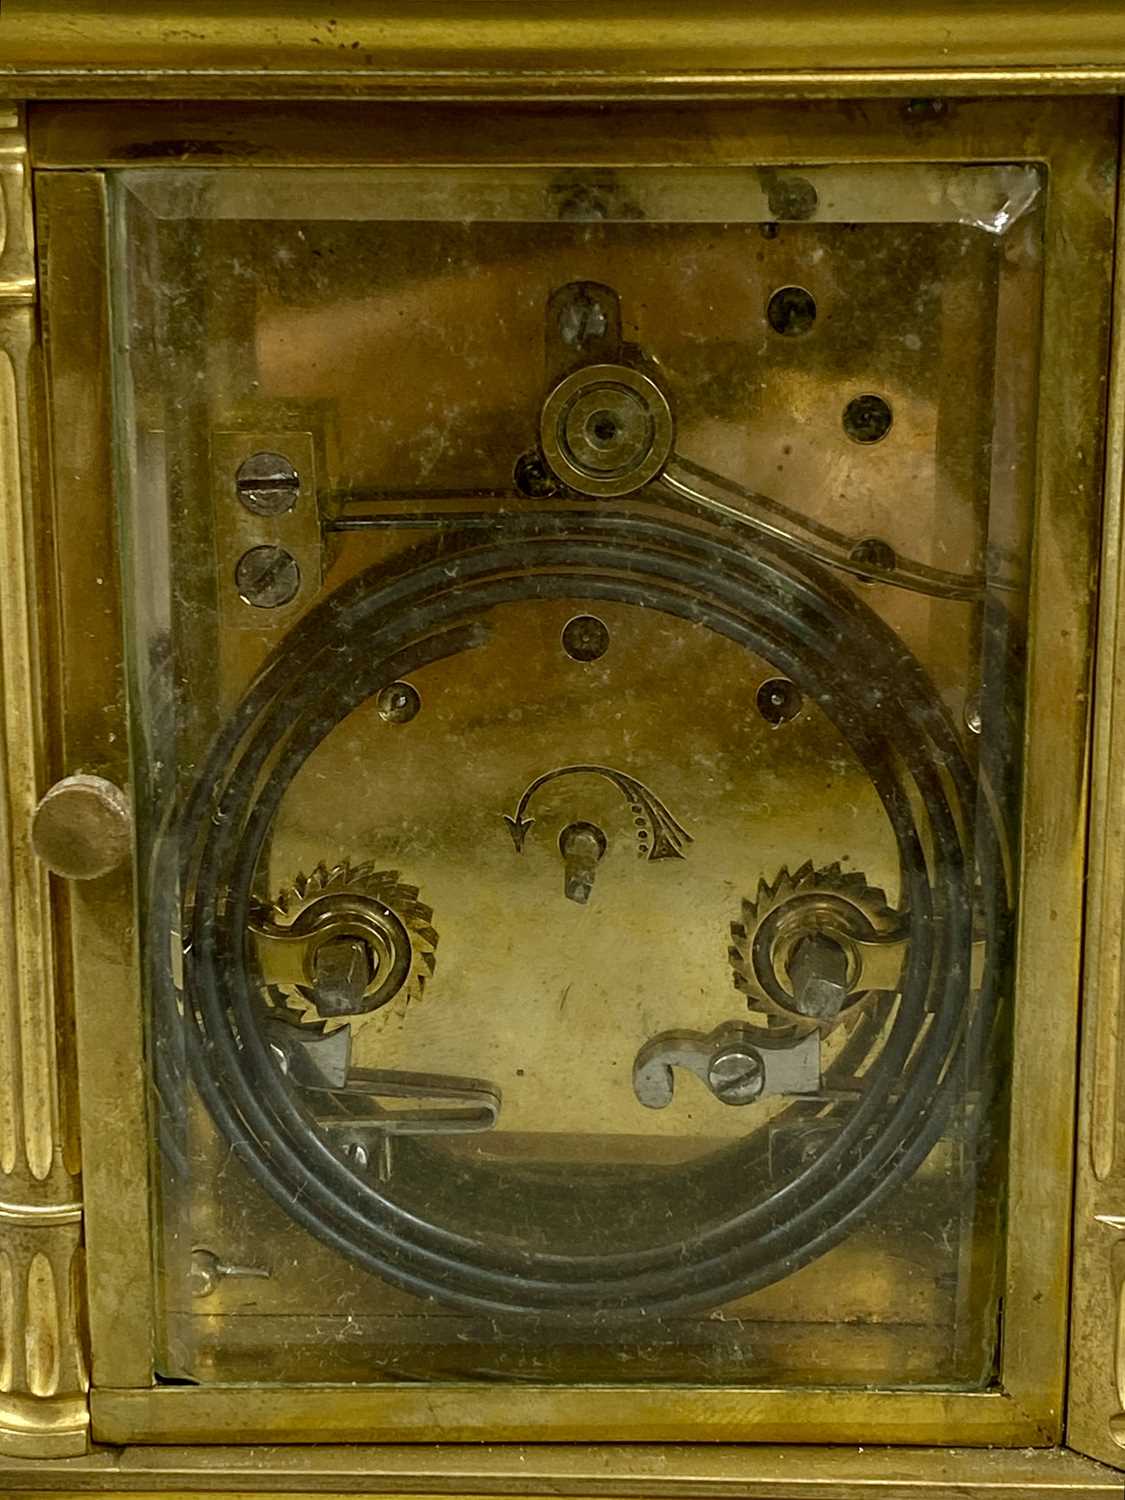 GILT BRASS CASED CARRIAGE CLOCK, late 19th century with fluted columns, circular silvered dial - Image 3 of 4